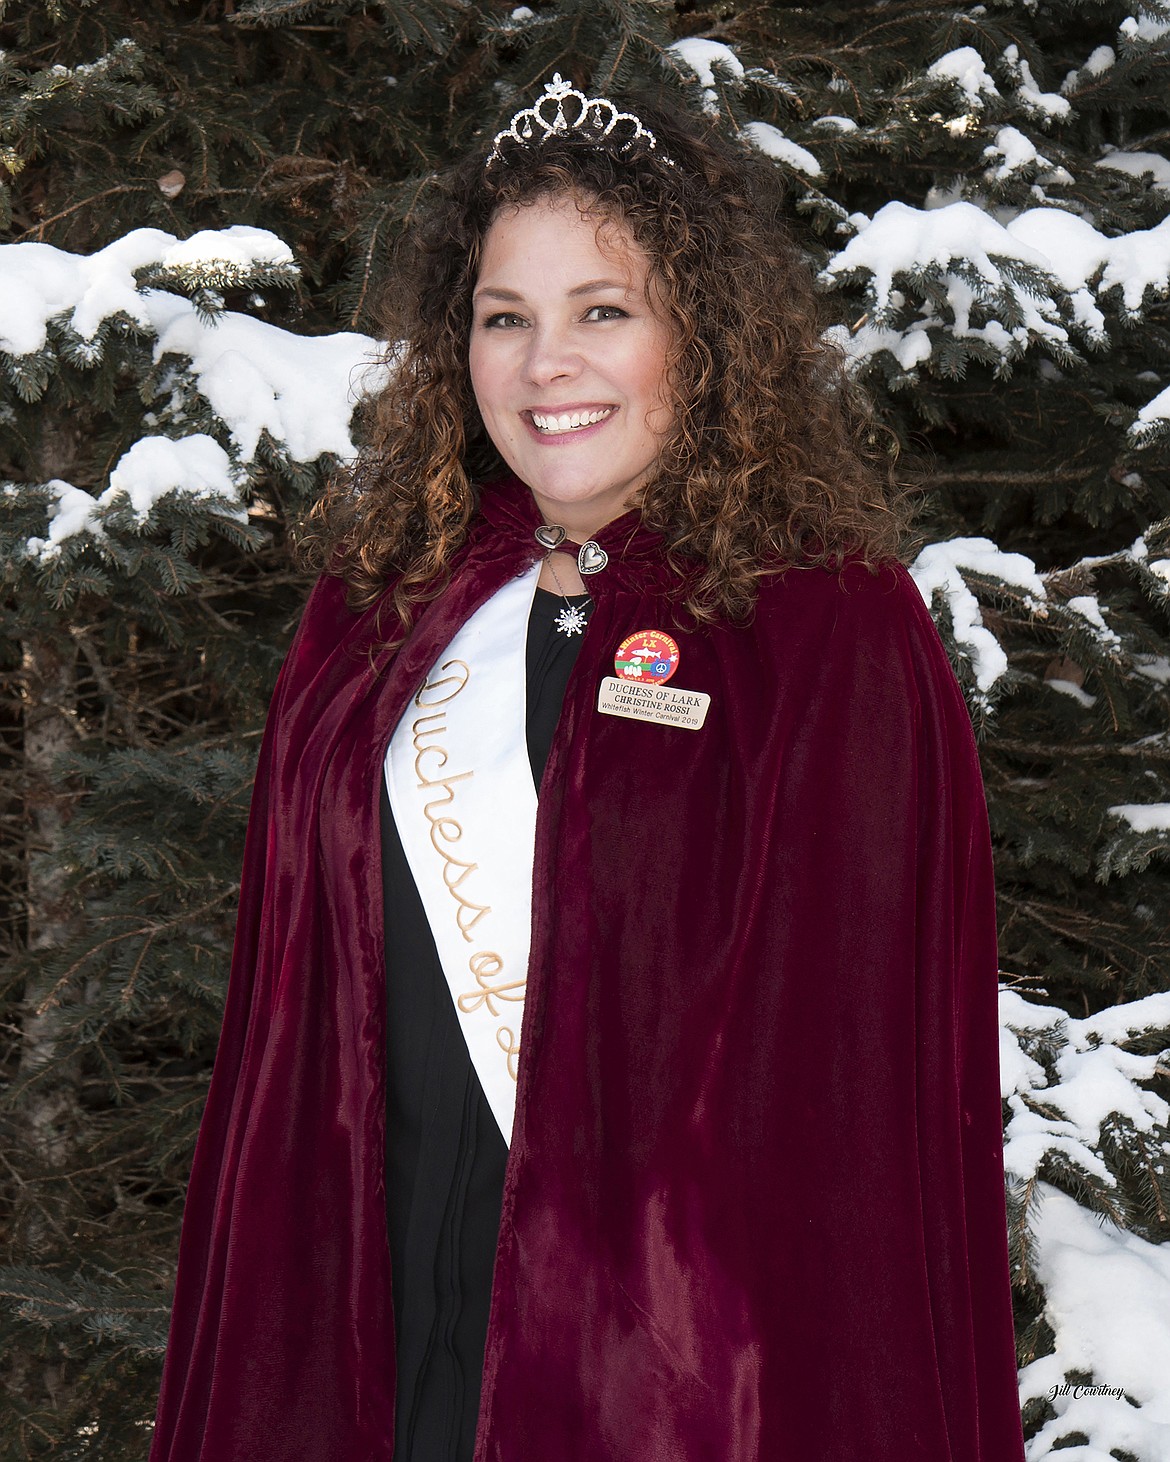 Christine Rossi is the Duchess of Lark of the 2019 Whitefish Winter Carnival.